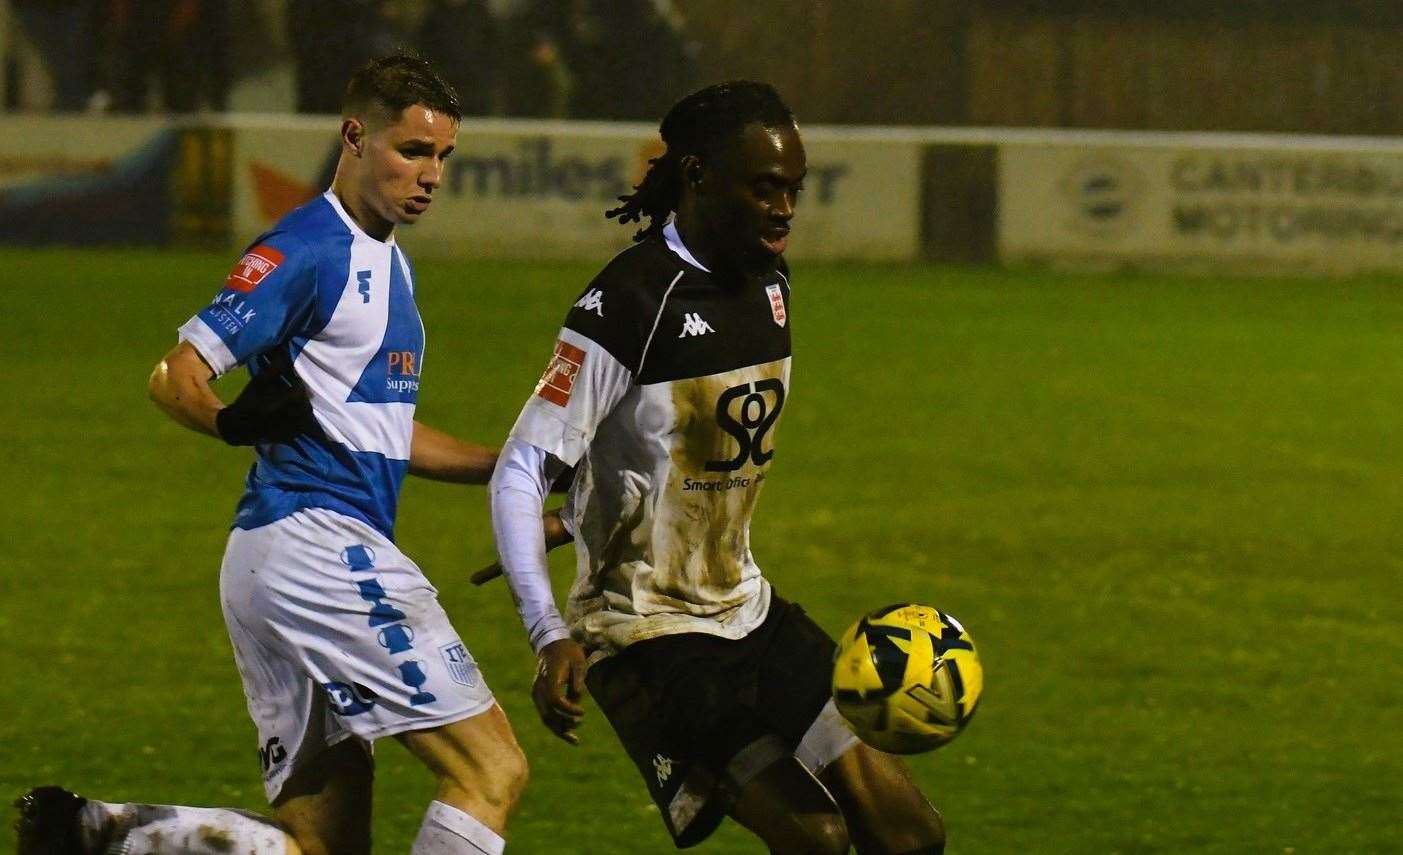 Faversham's Antone Douglas is closed down by Sheppey striker Jake Embery. Picture: Marc Richards